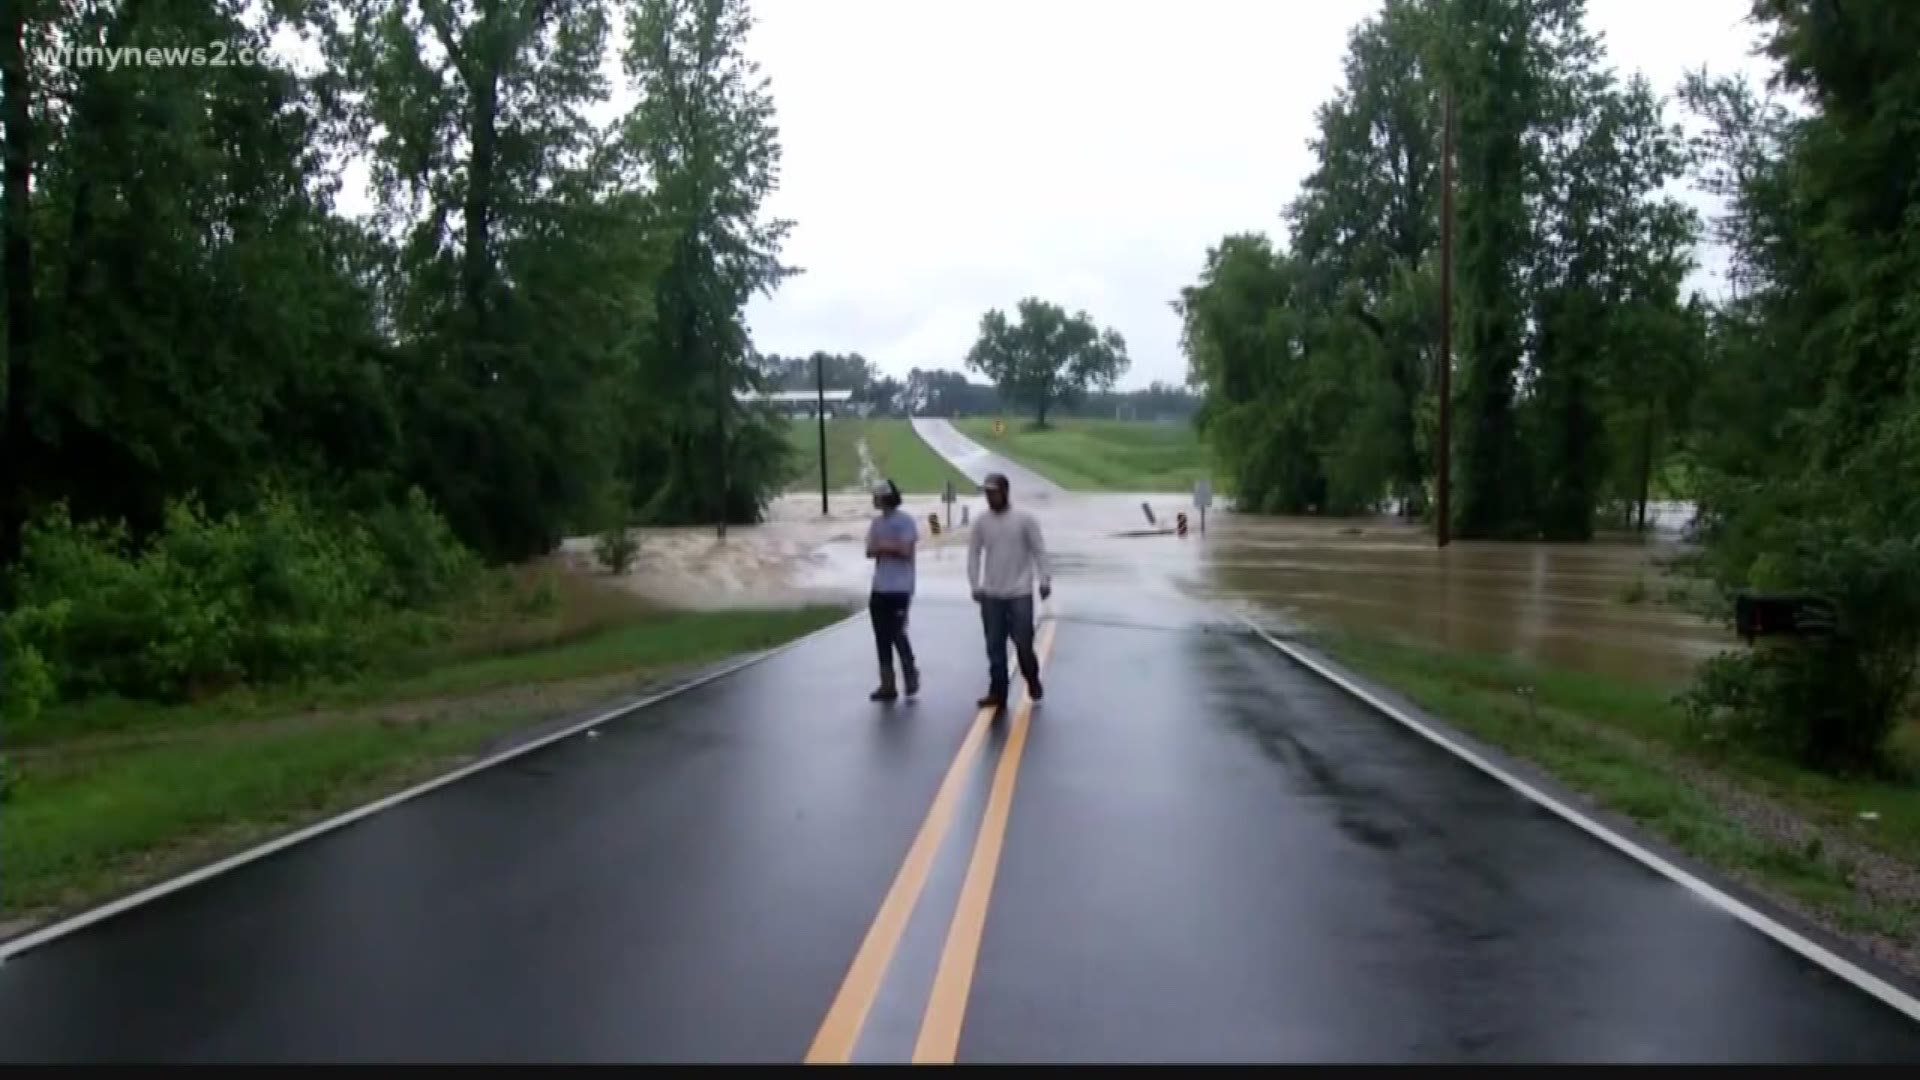 As showers continue across the state, floodwaters consumed many streets and roads.